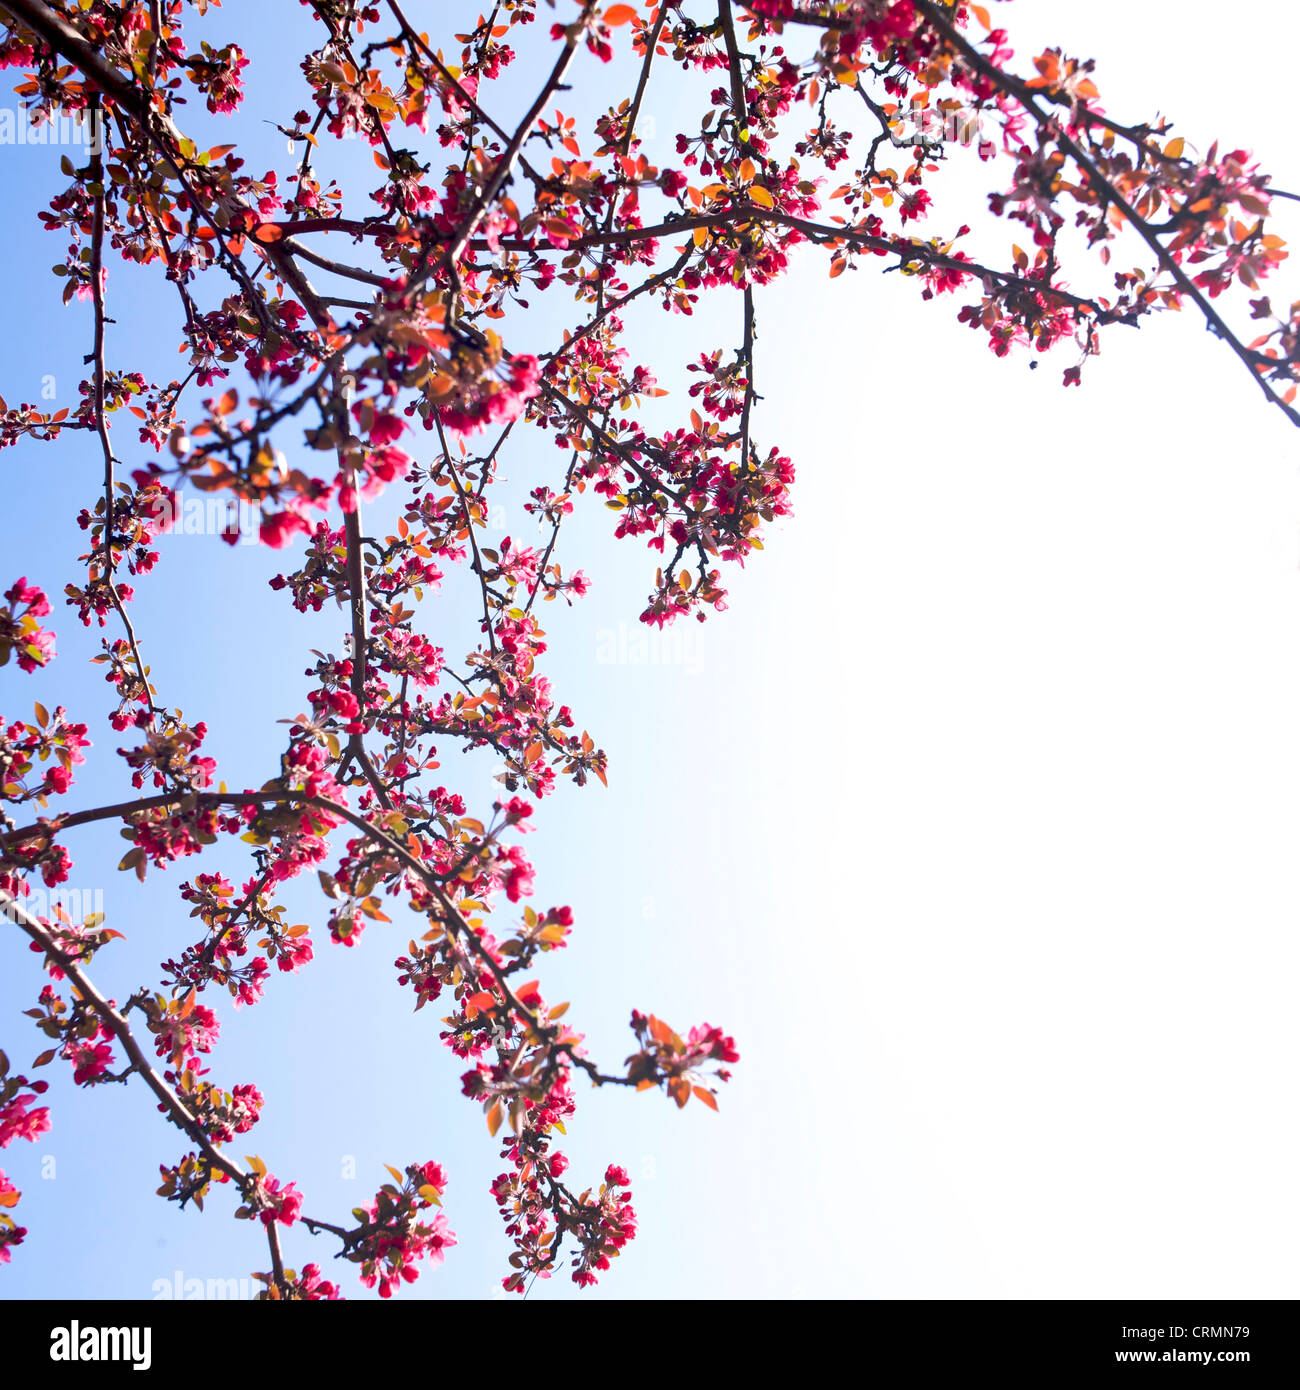 Looking up at beautiful branches full of pink Cherry blossom hanging from a tree in the spring season. Stock Photo